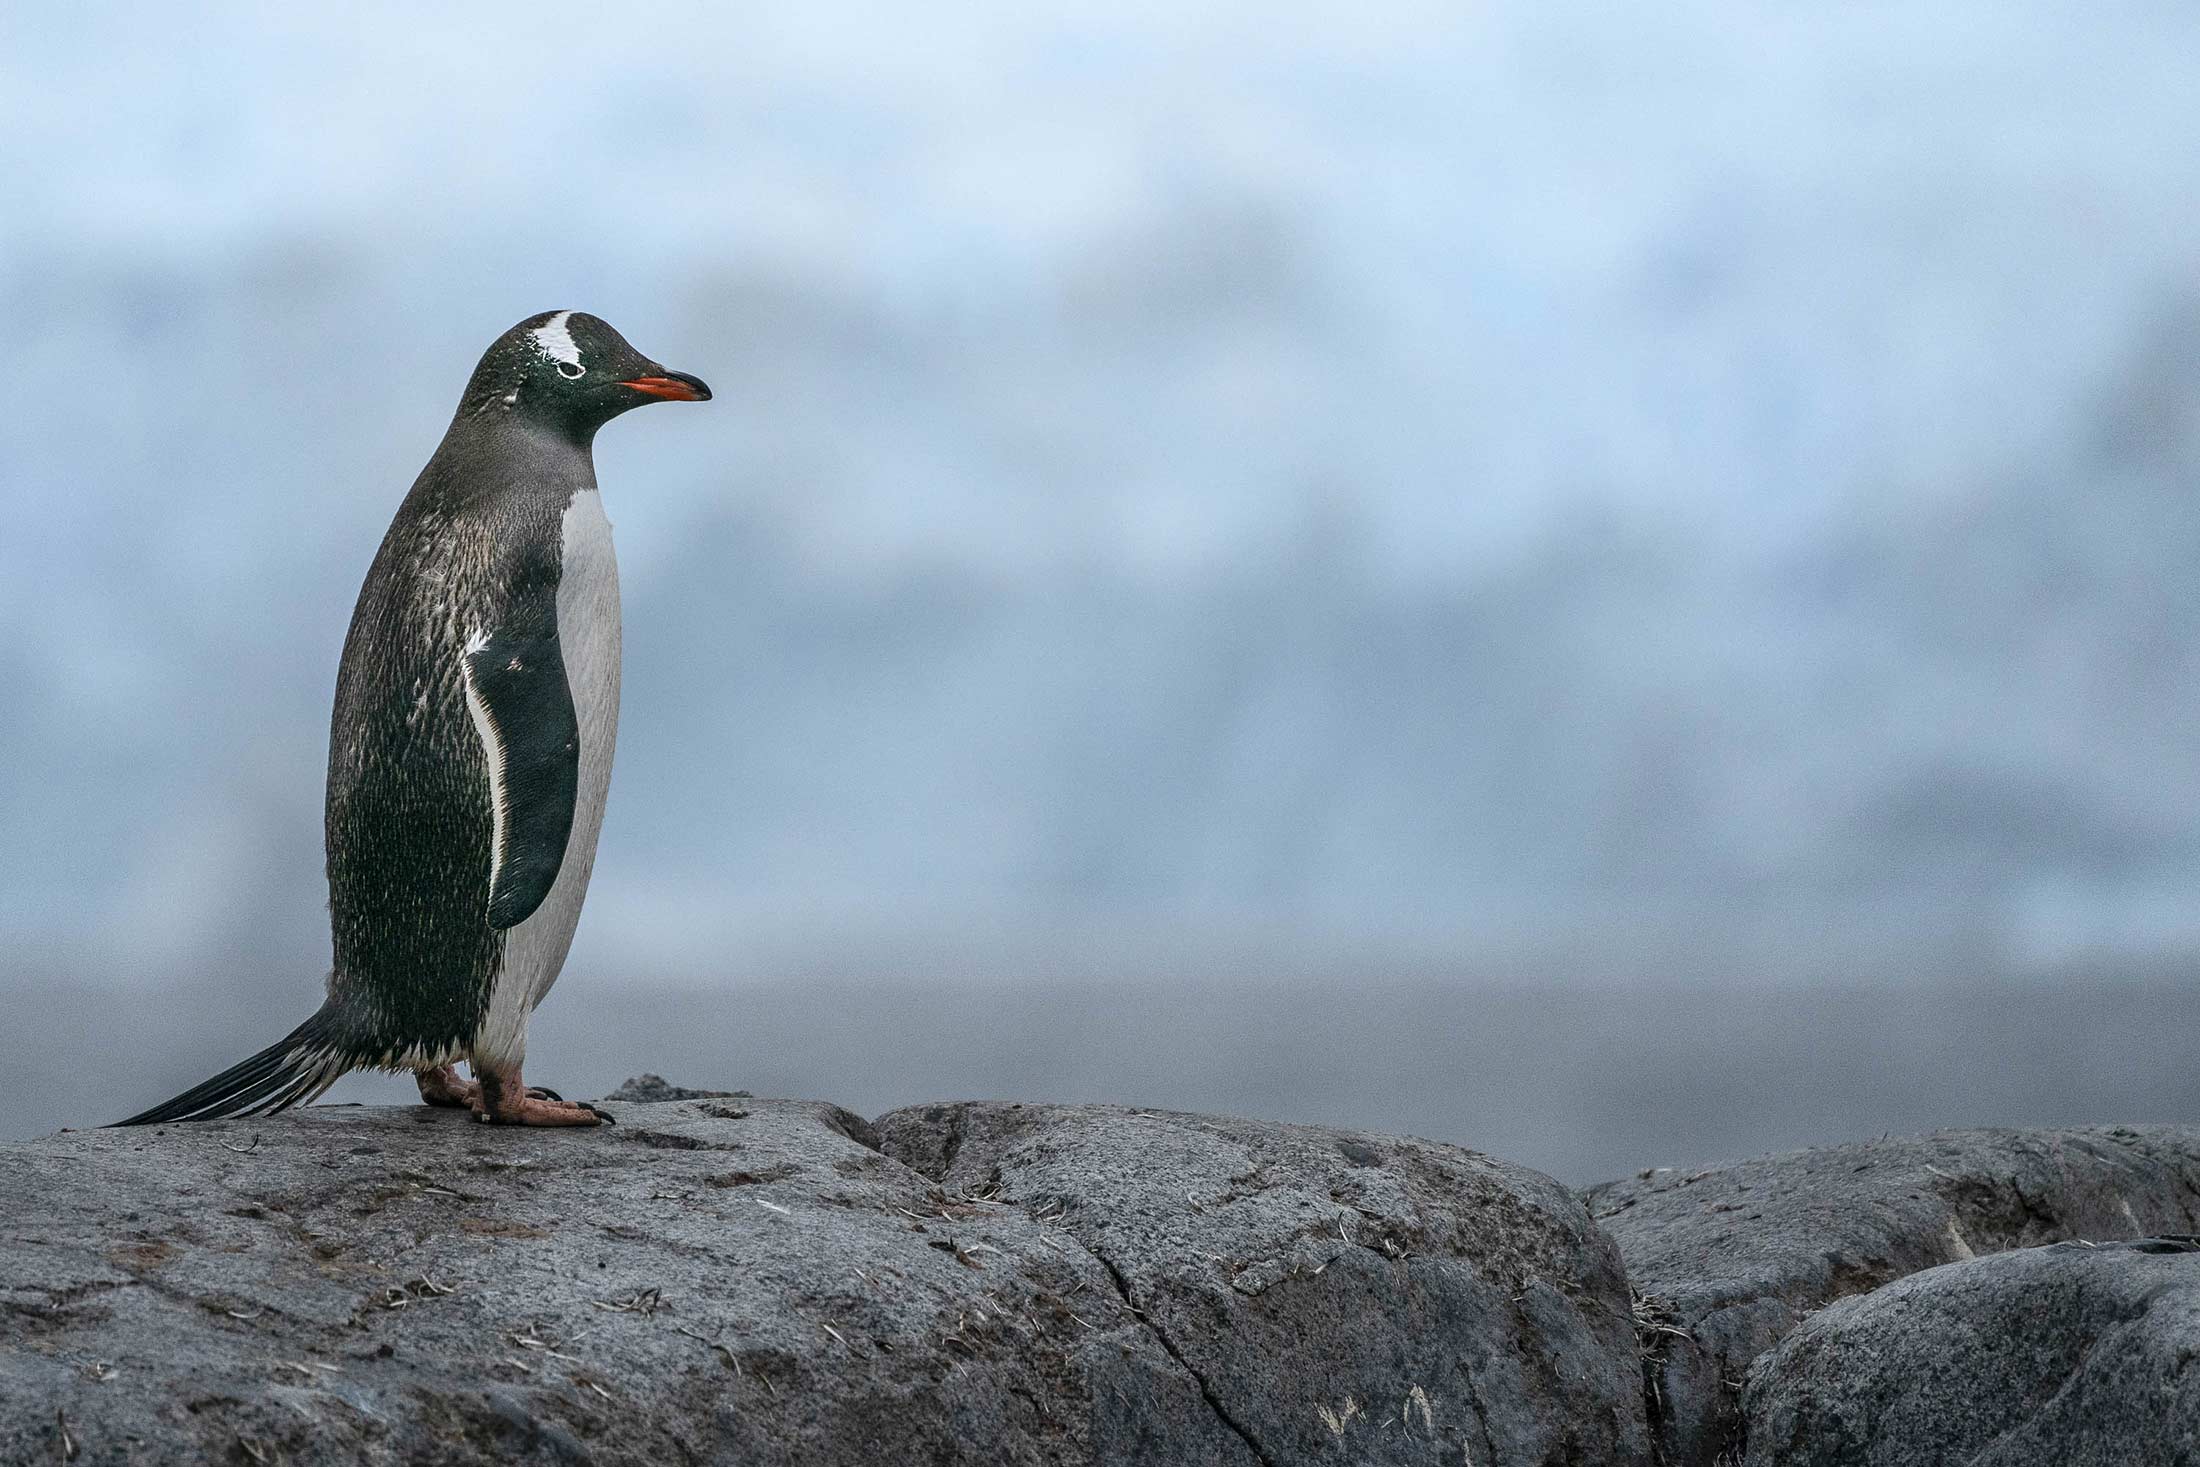 black and white bird with an orange bill standing on rocks in the Antarctic Peninsula